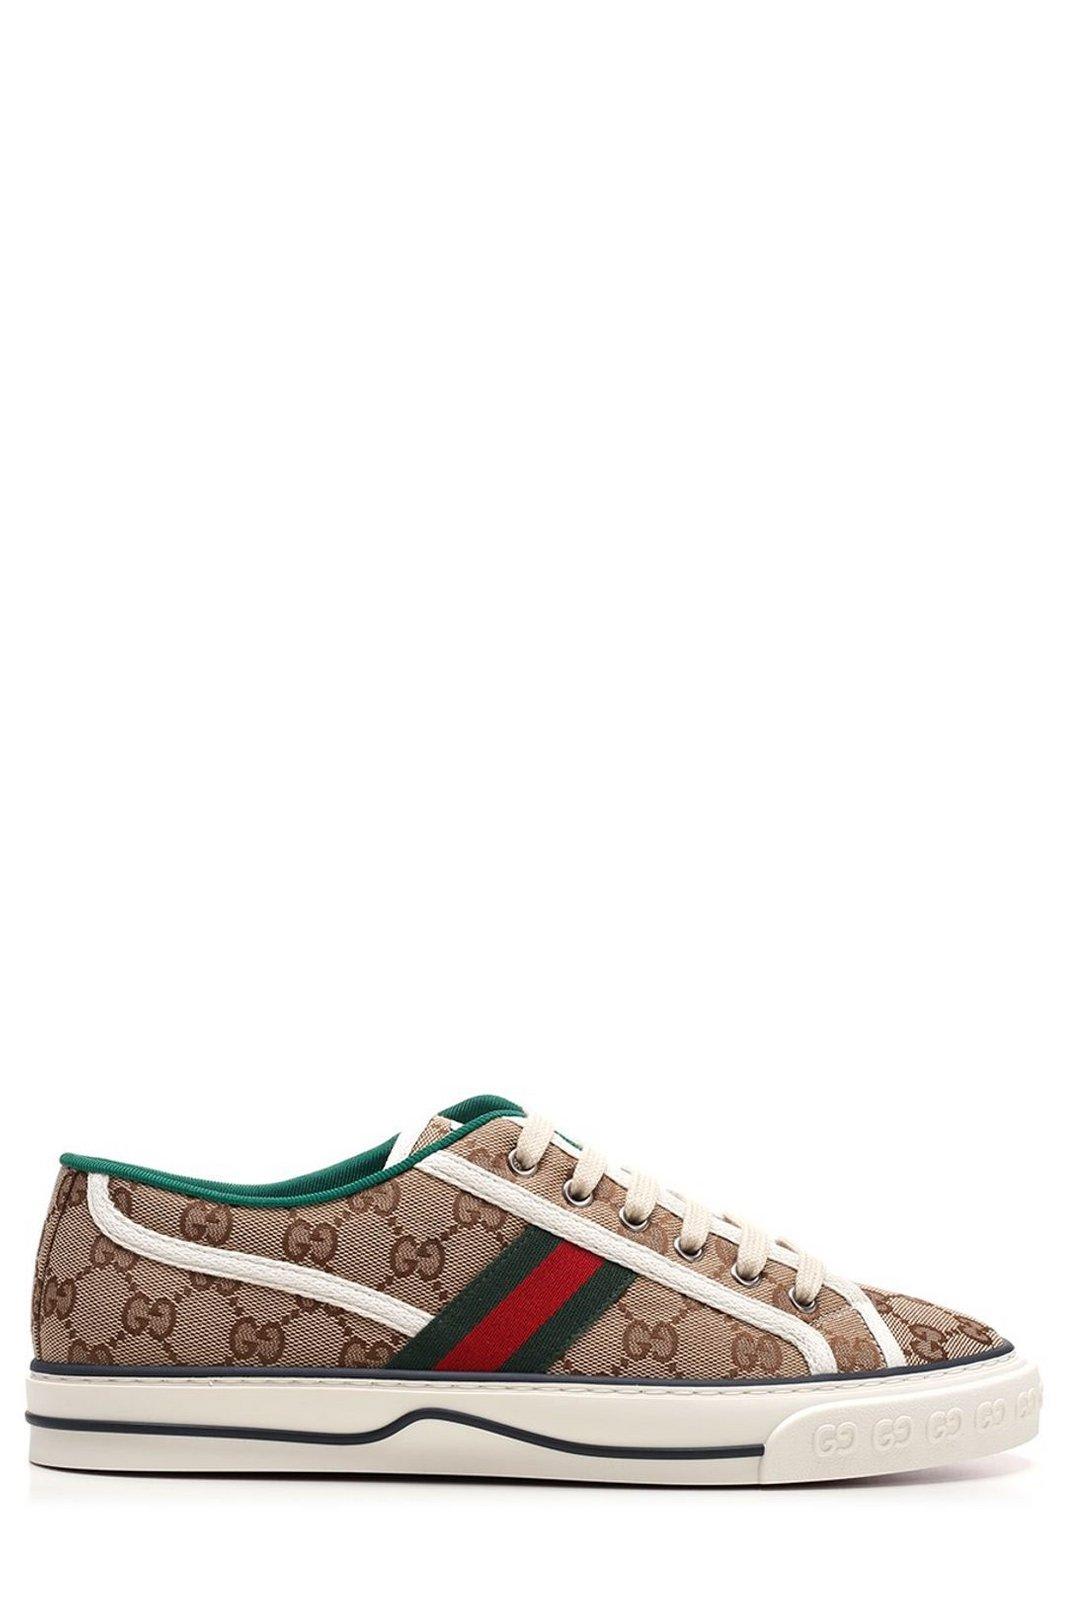 Gucci Gg Tennis 1977 Sneakers